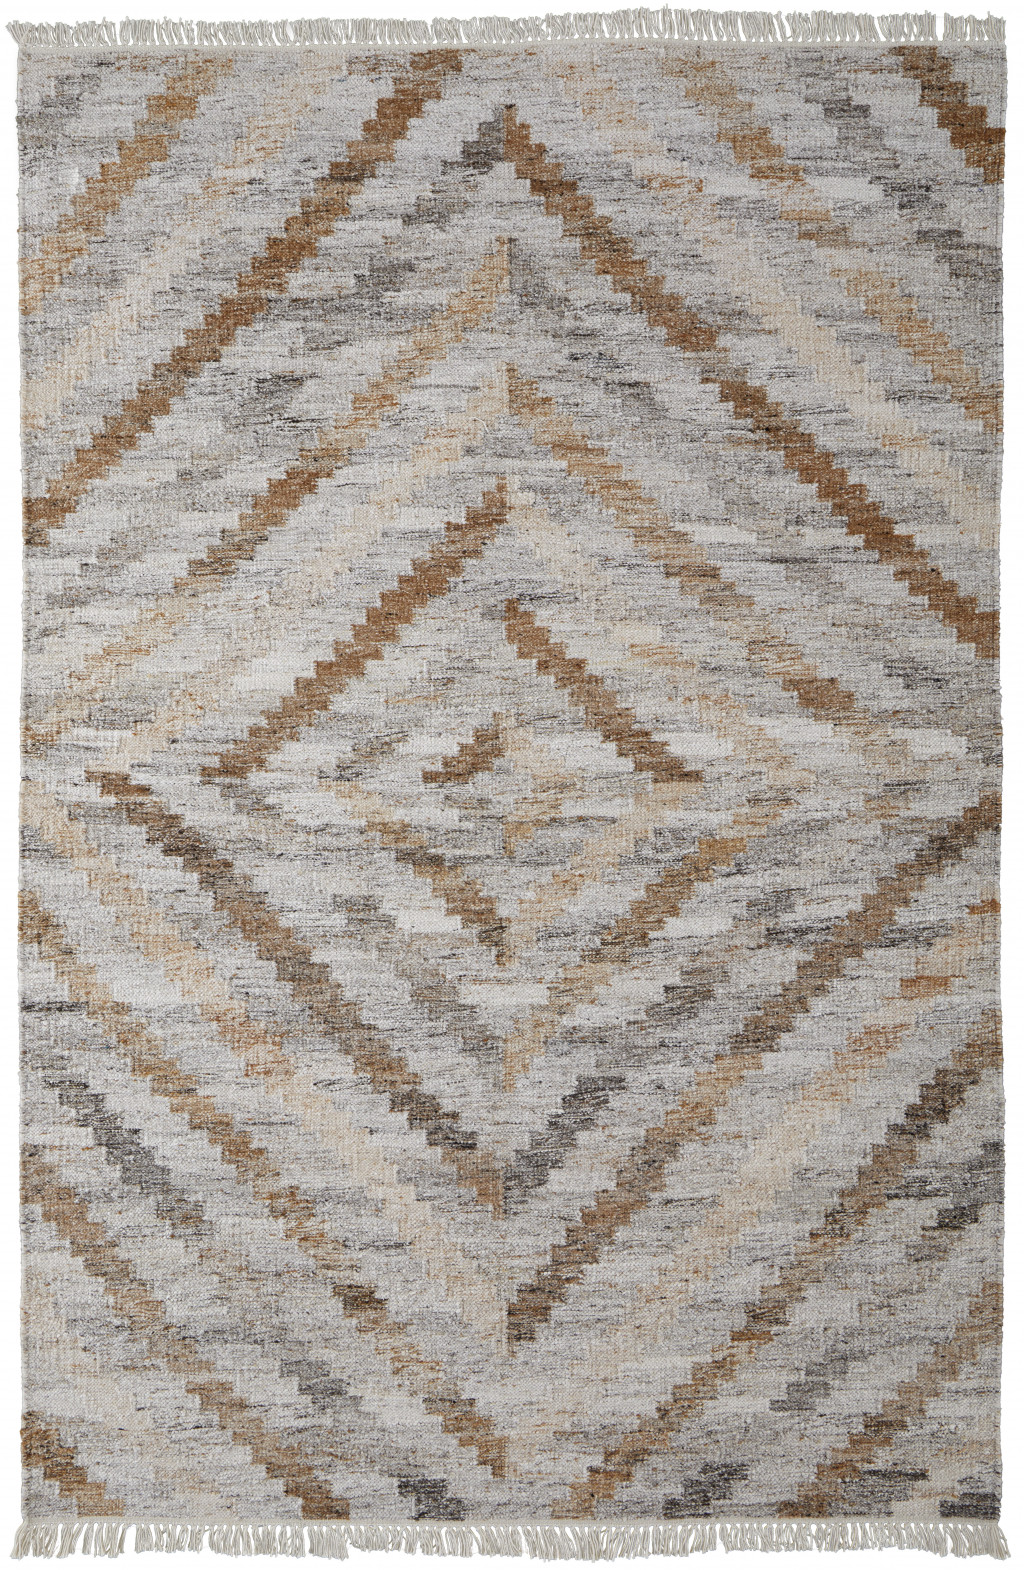 10' X 13' Ivory Gray And Tan Geometric Hand Woven Stain Resistant Area Rug With Fringe-512426-1